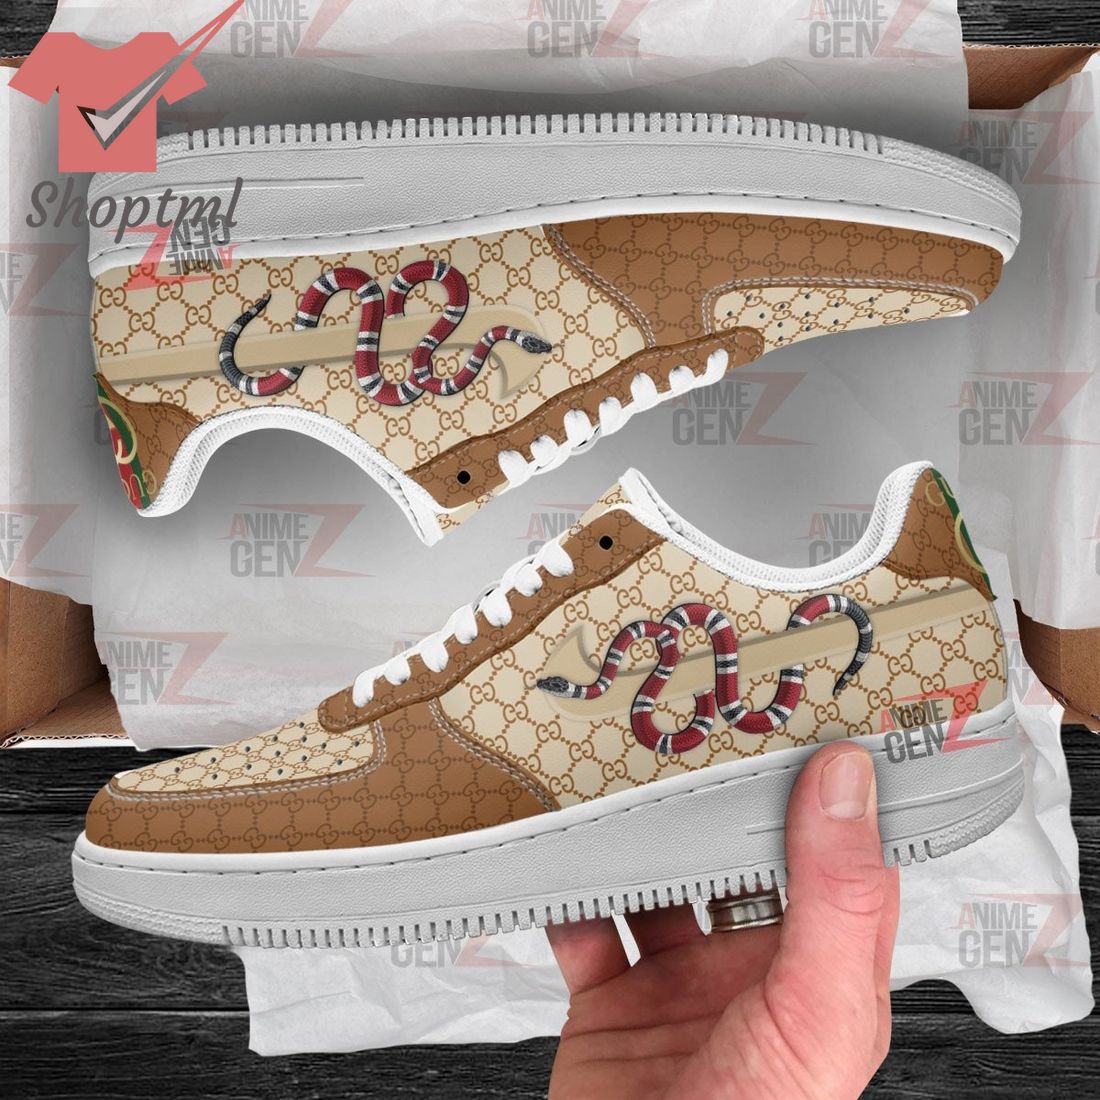 Gucci Luxury Brand Air Force 1 Sneakers